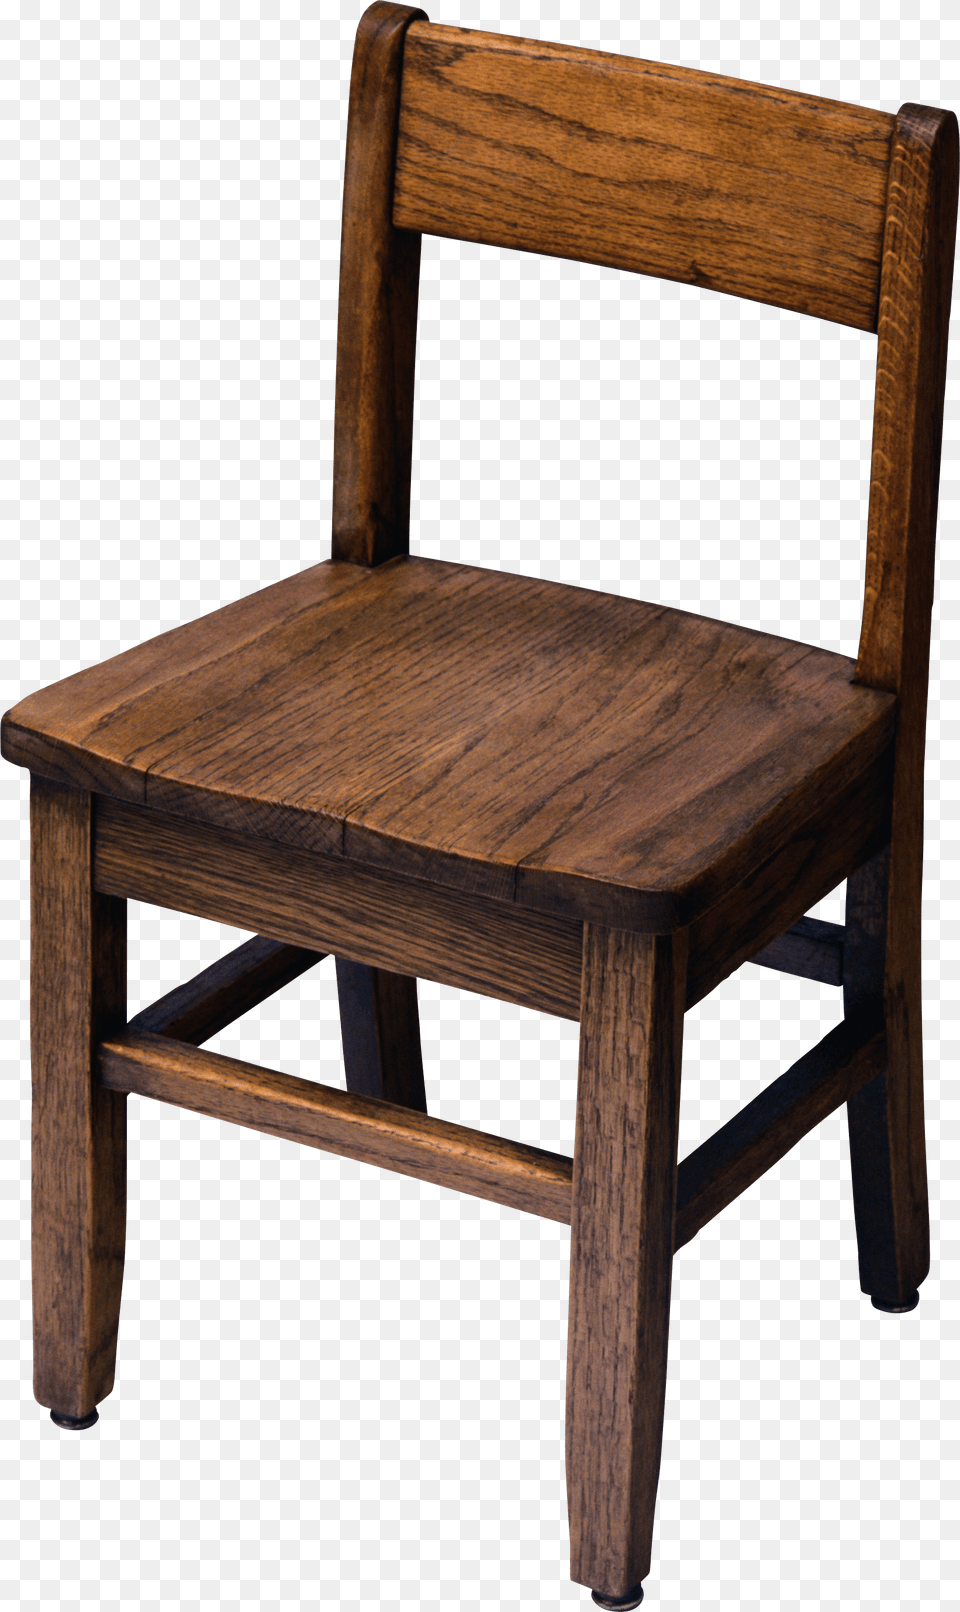 Old Wooden Chair, Furniture, Wood, Hardwood, Stained Wood Free Transparent Png